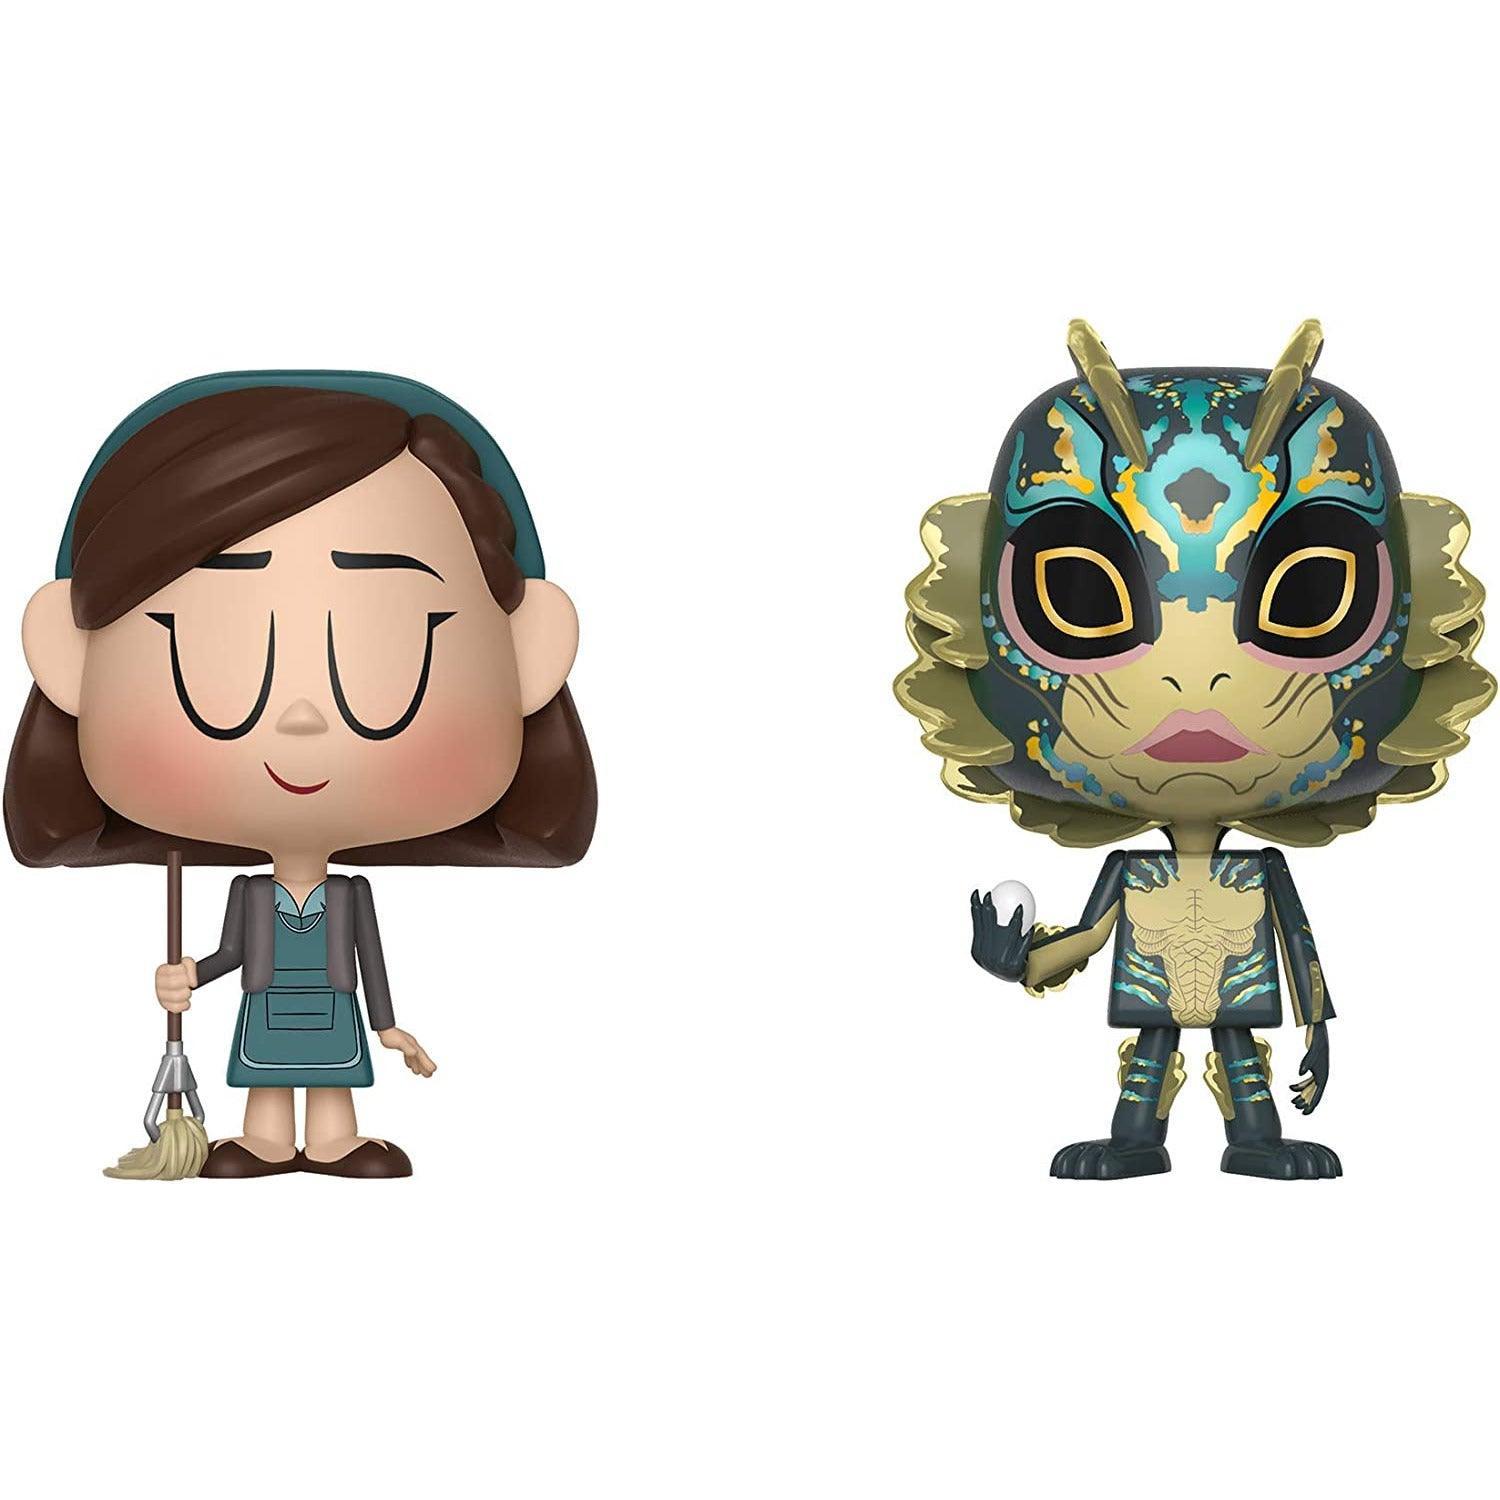 Funko Vynl Shape of Water - Elisa & Amphibian Man - BumbleToys - 18+, 4+ Years, 5-7 Years, Action Figures, Boys, Characters, Dexter, Funko, Pre-Order